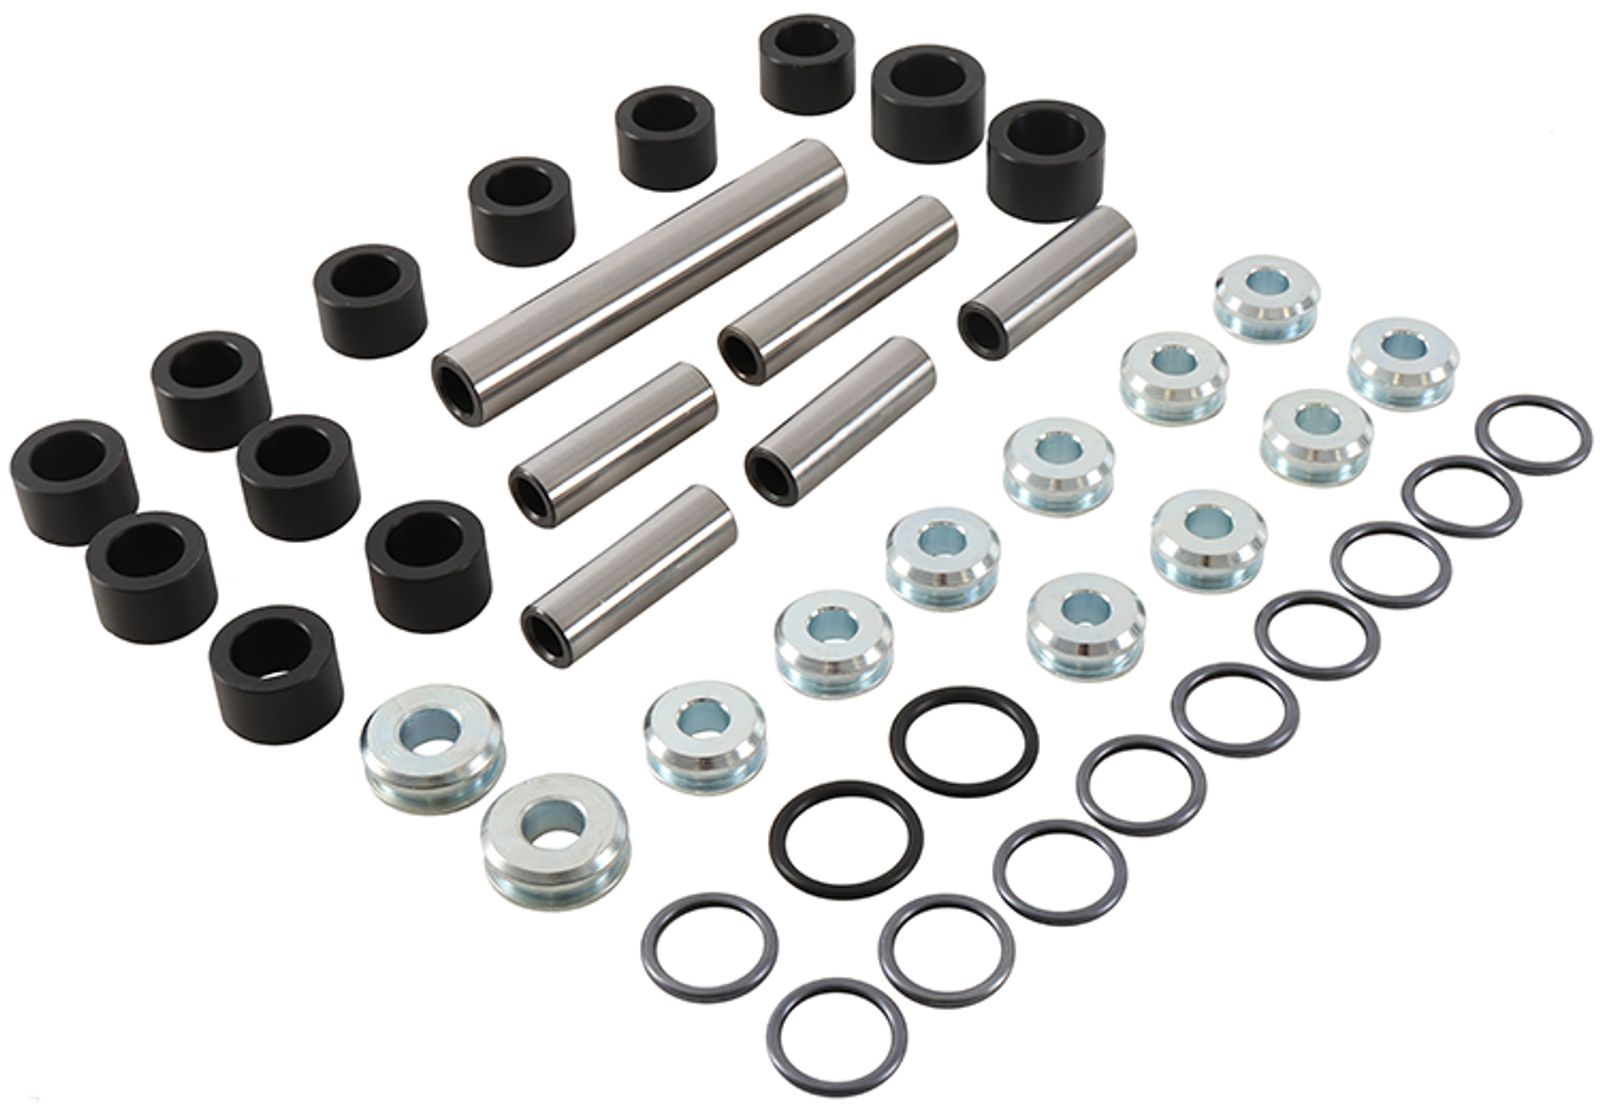 Wrp Rear Ind. Suspension Kits - WRP501196 image